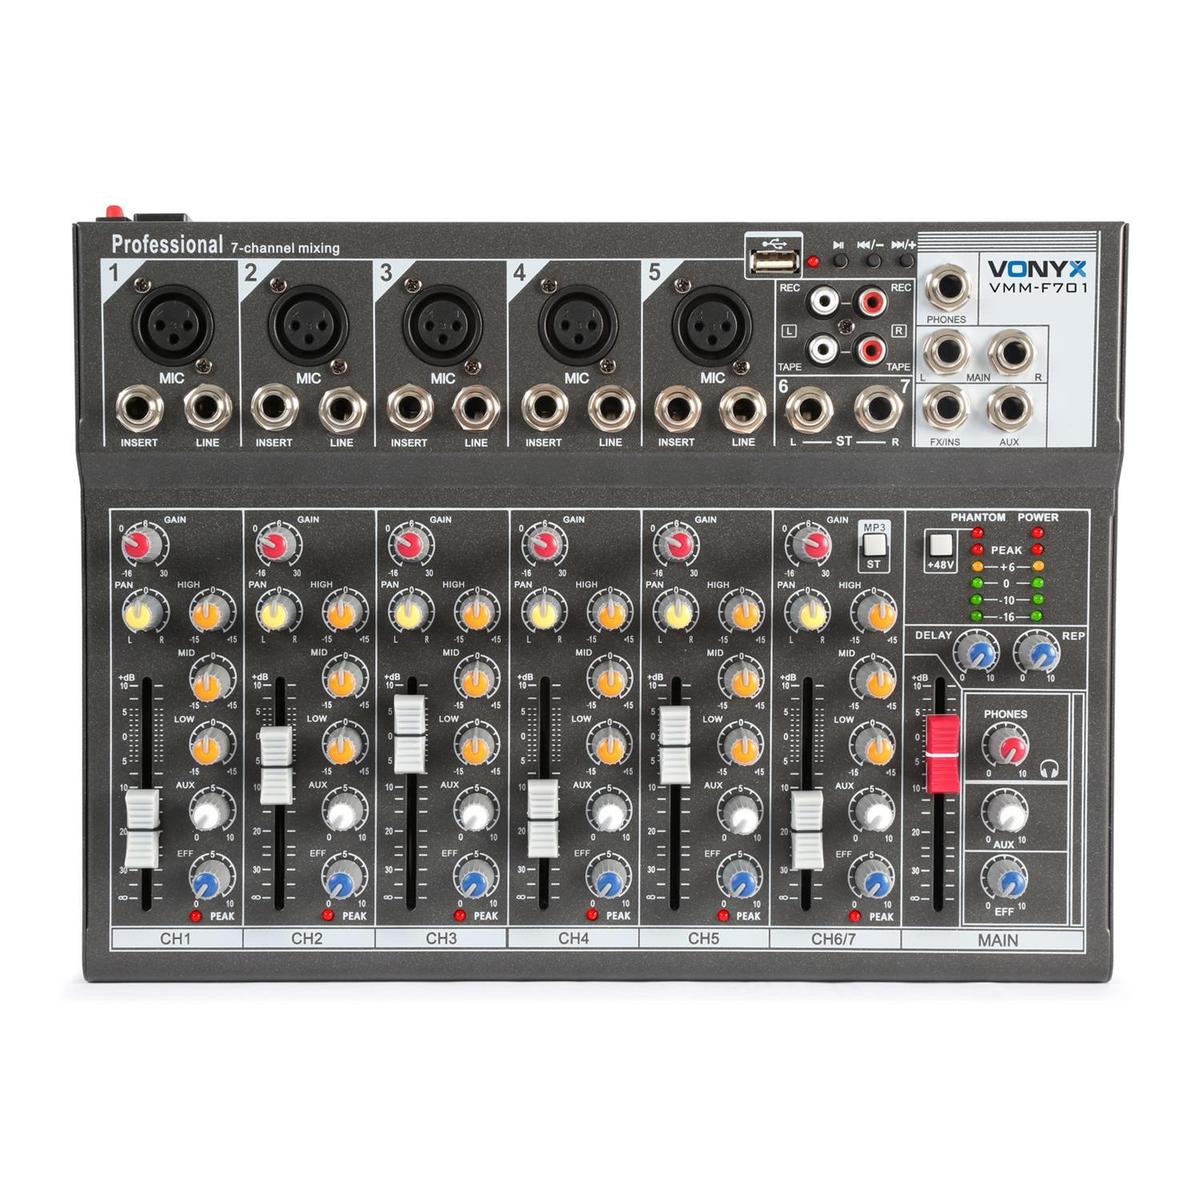 VMM-F701 Table de mixage 7 canaux 5 entrees micro interface audio USB